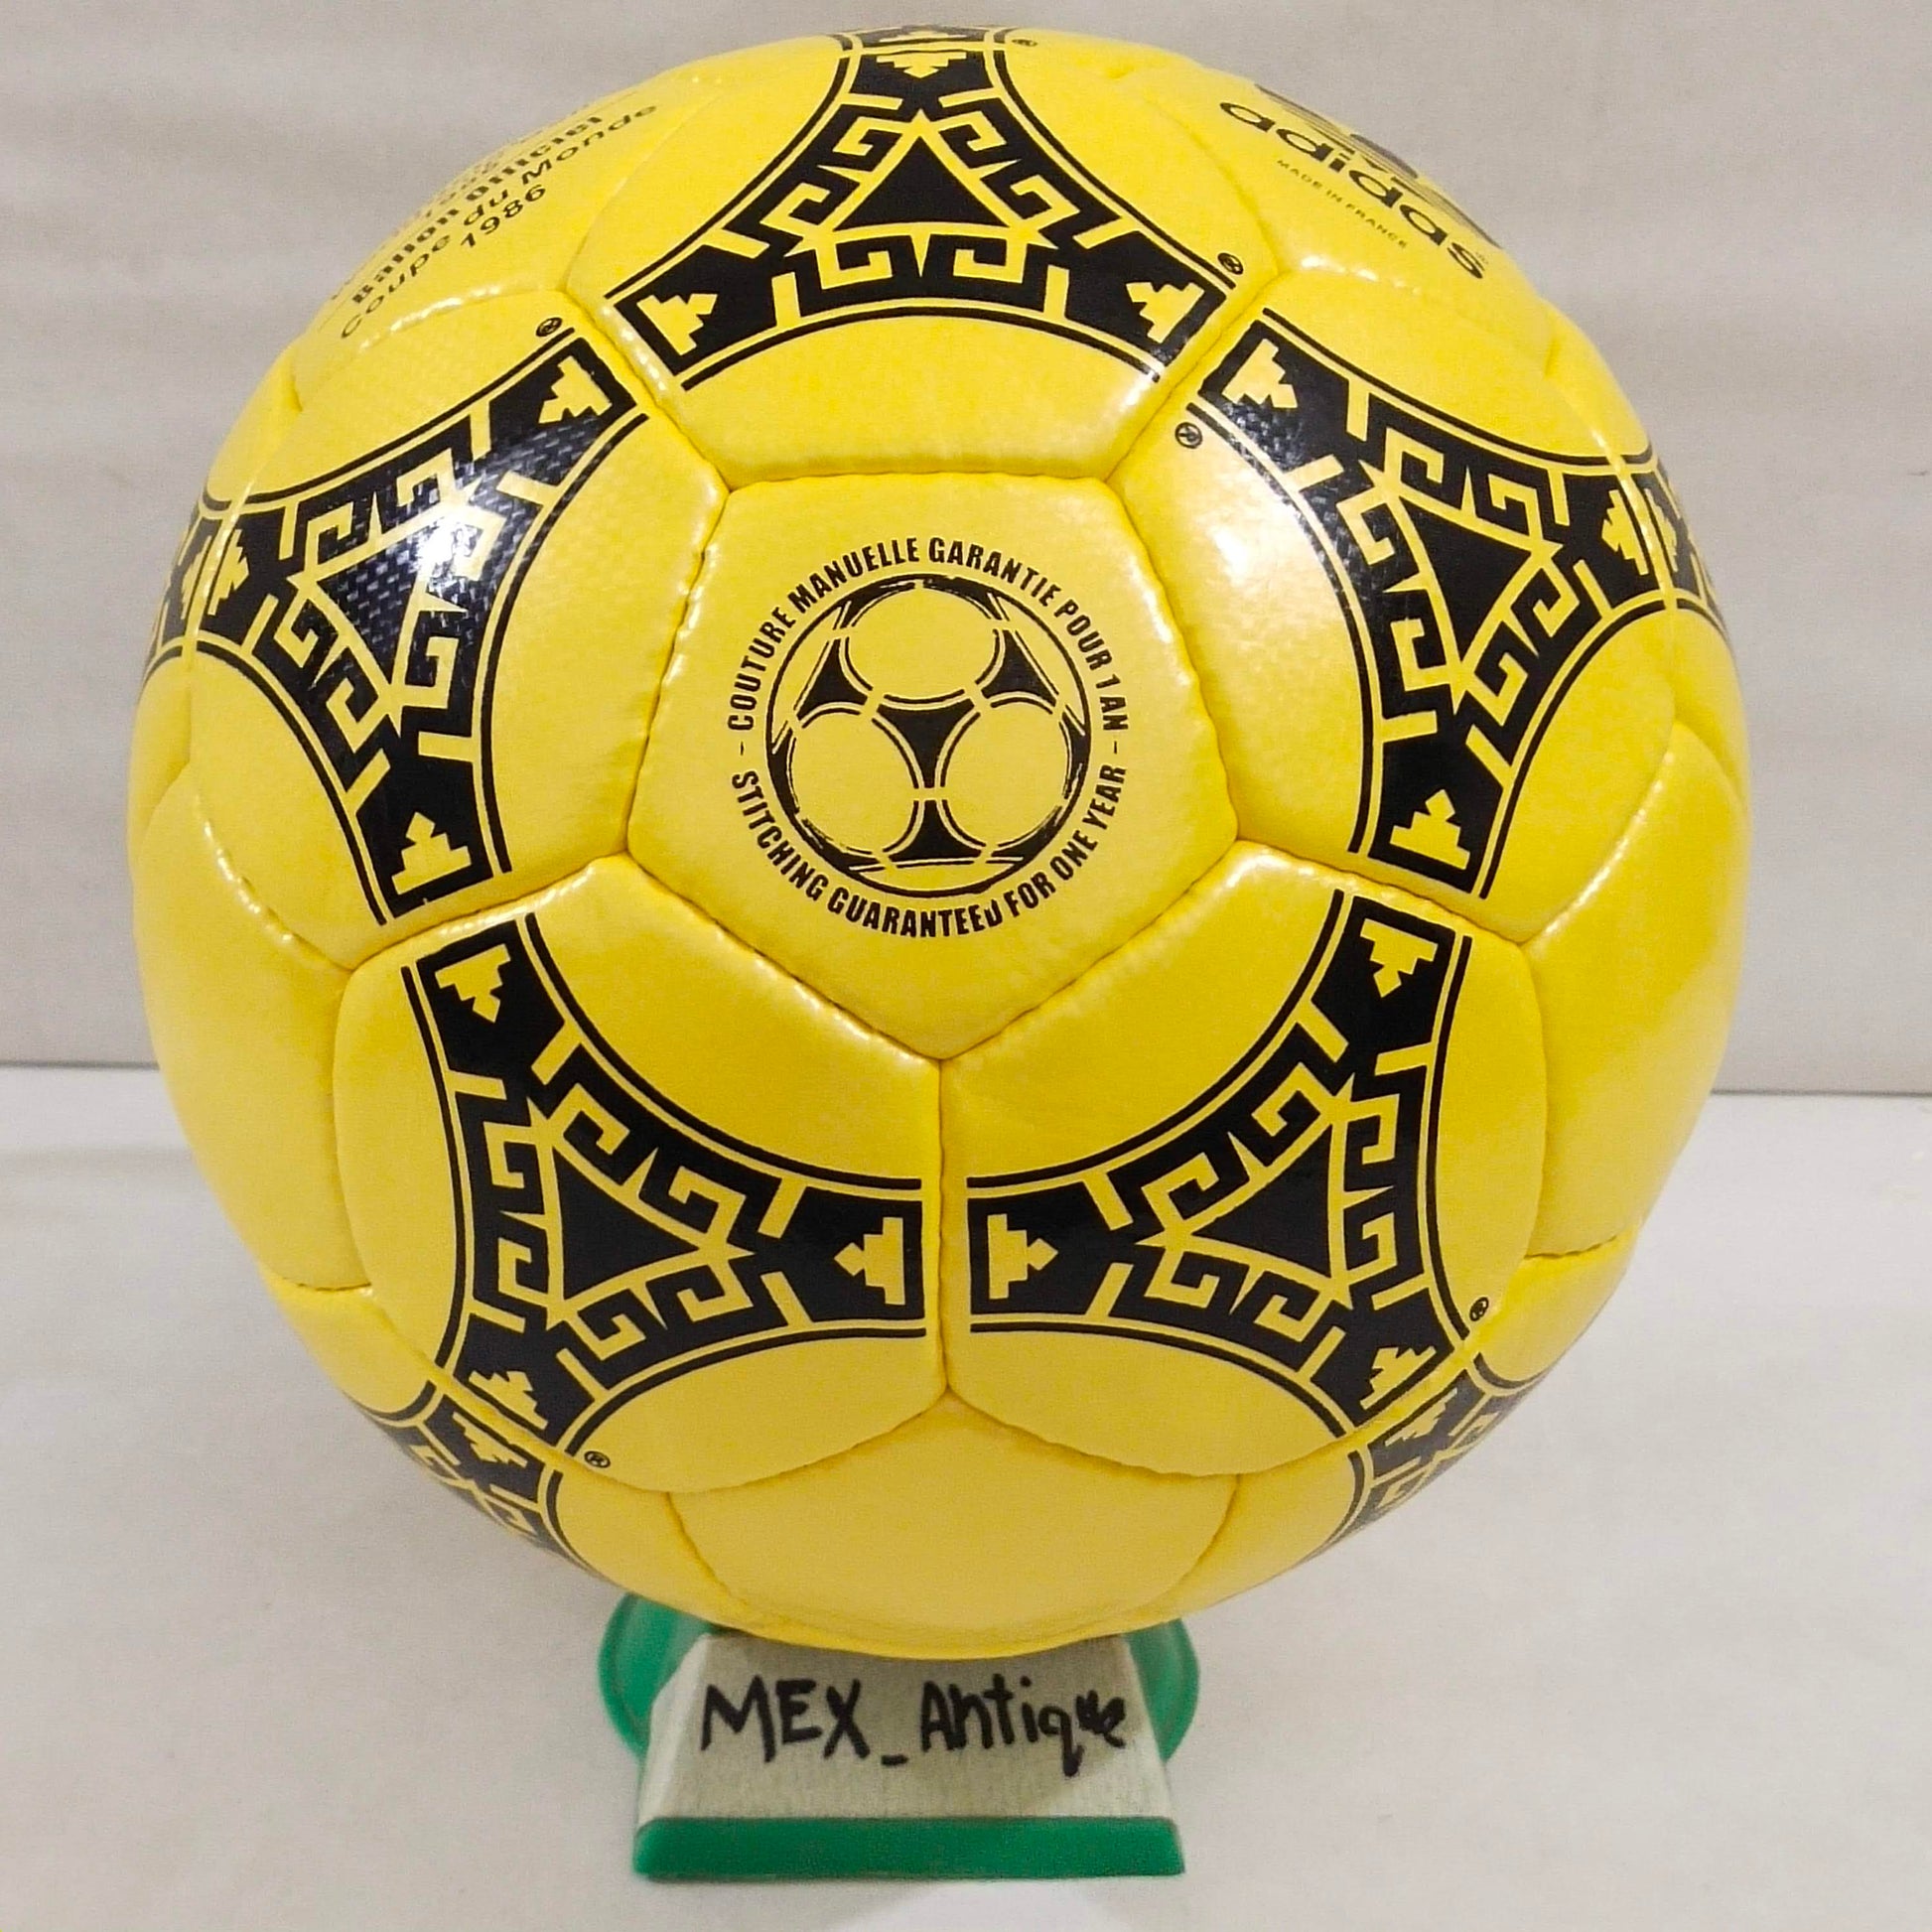 Adidas Azteca Mexico | FIFA World Cup 1986 | Yellow Winter Ball l SIZE 5 05